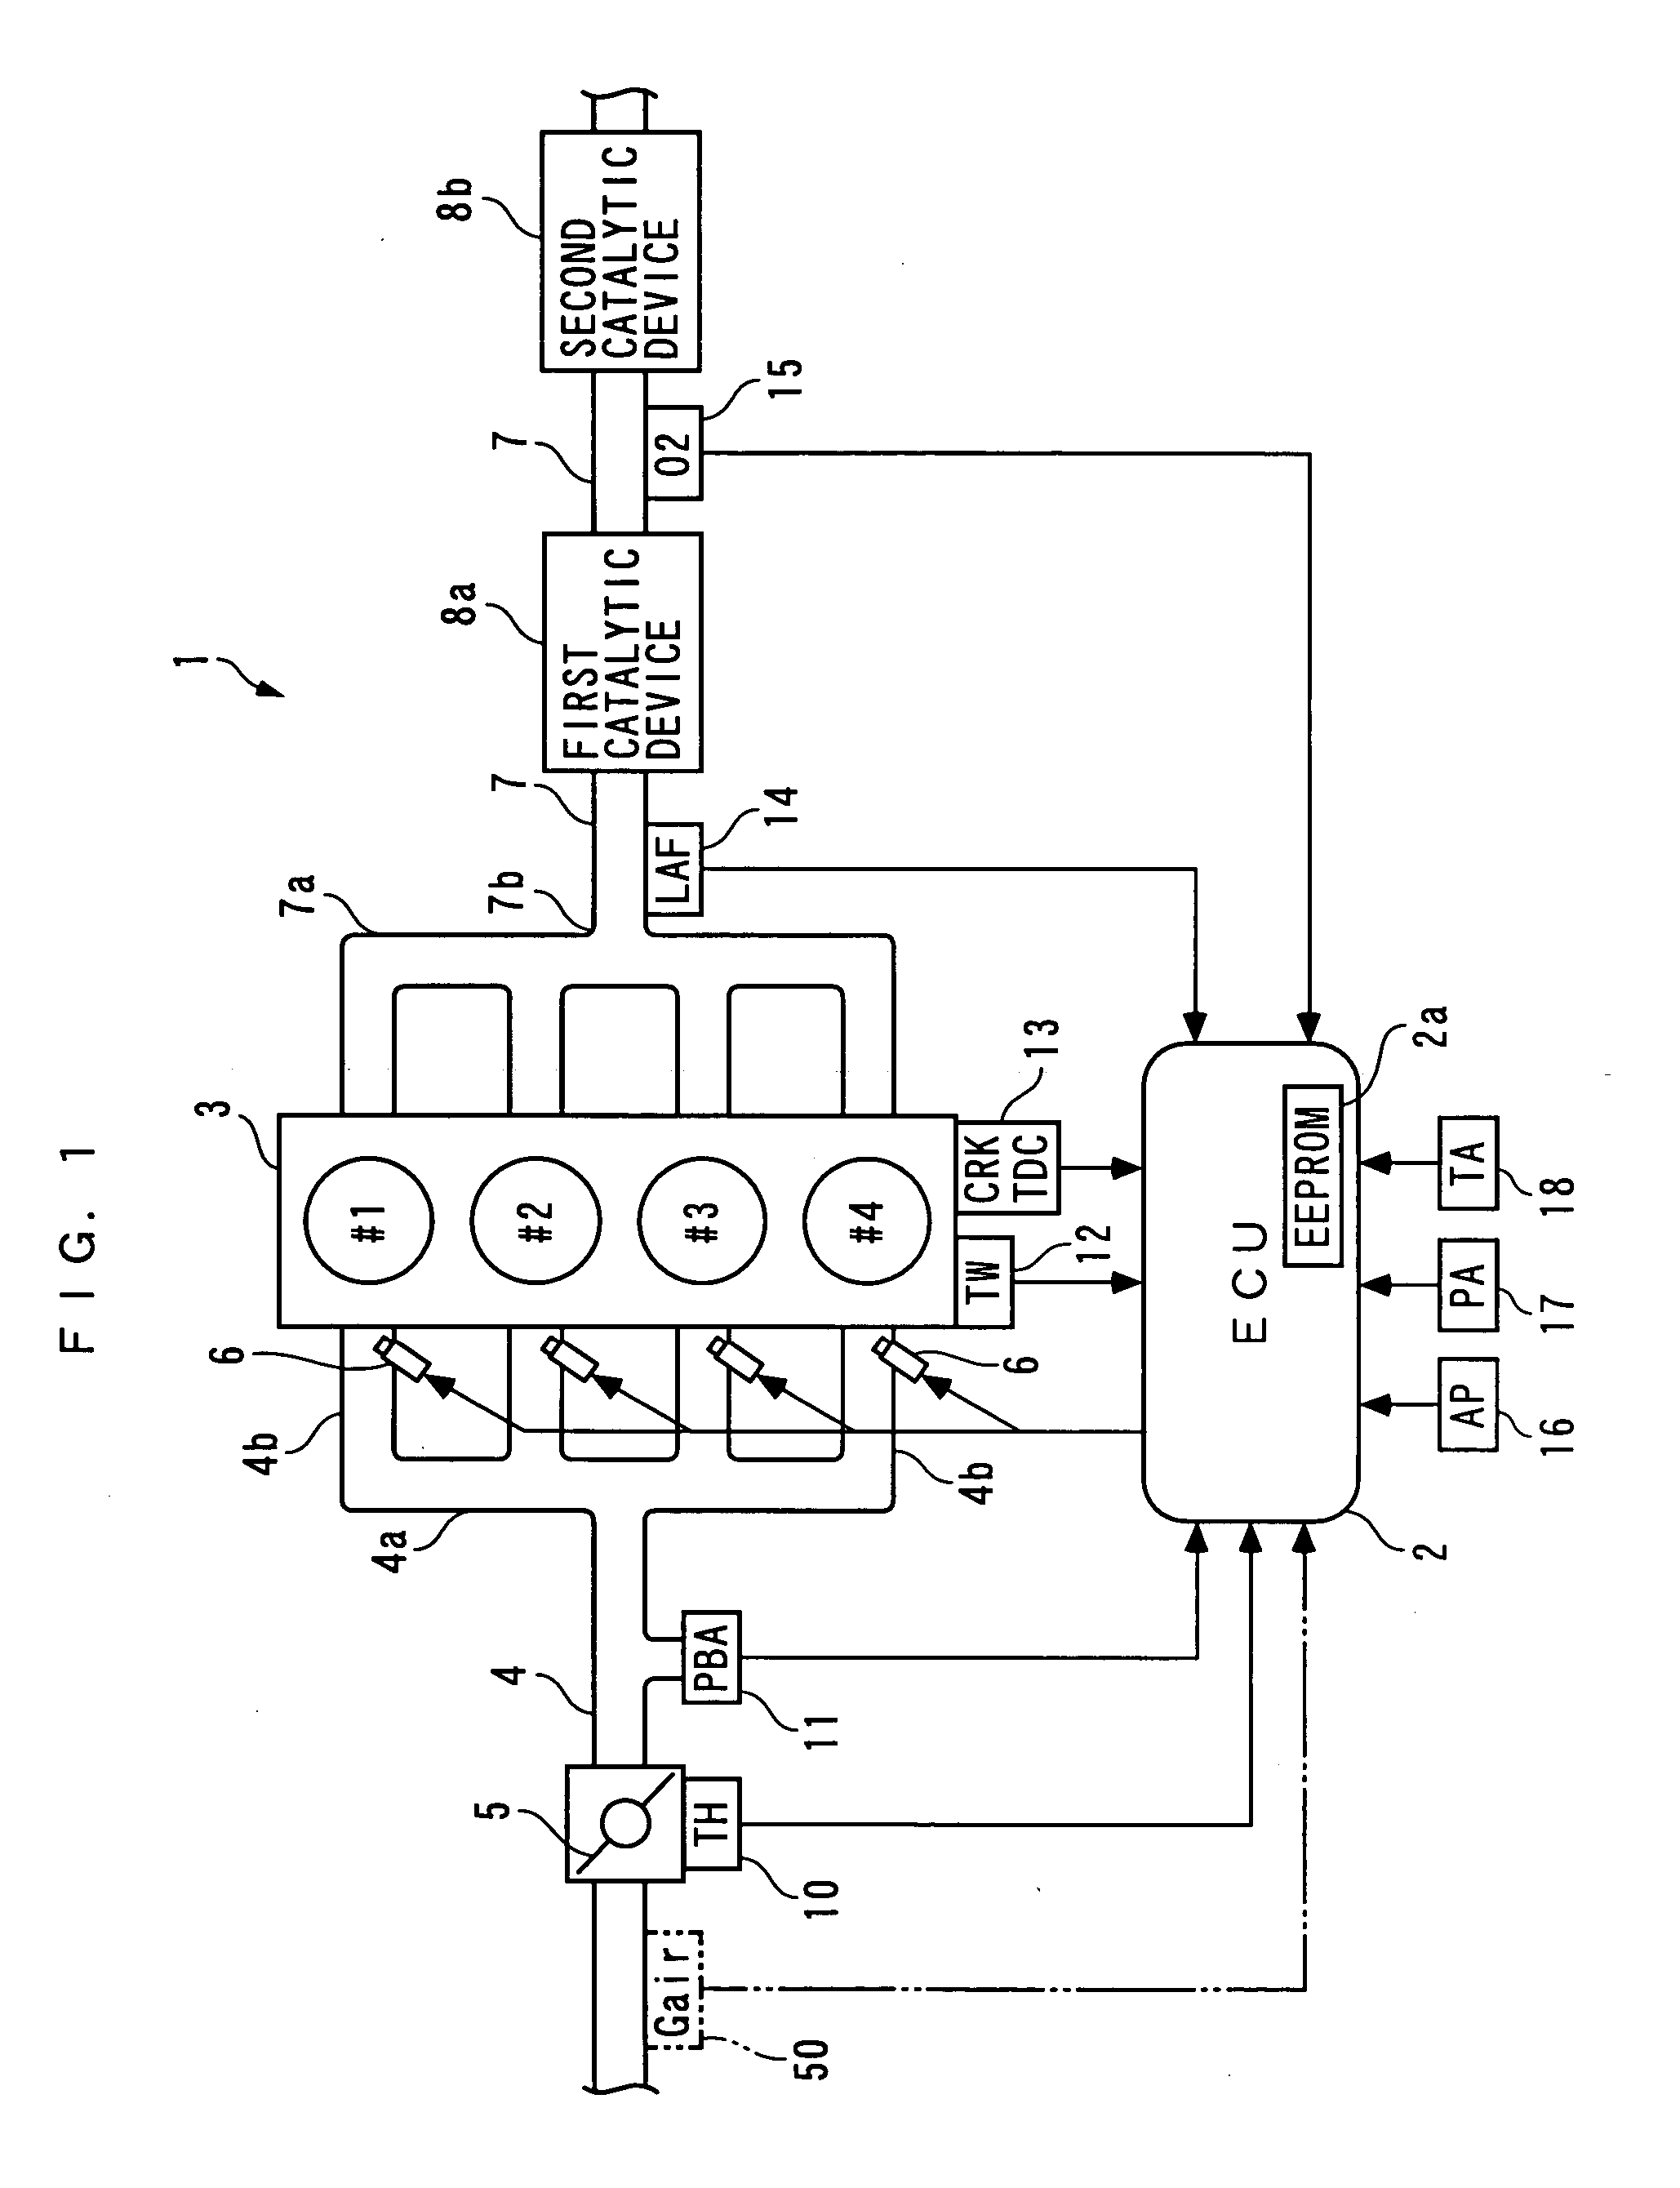 Air-fuel ratio control system and method for an internal combustion engine, and engine control unit